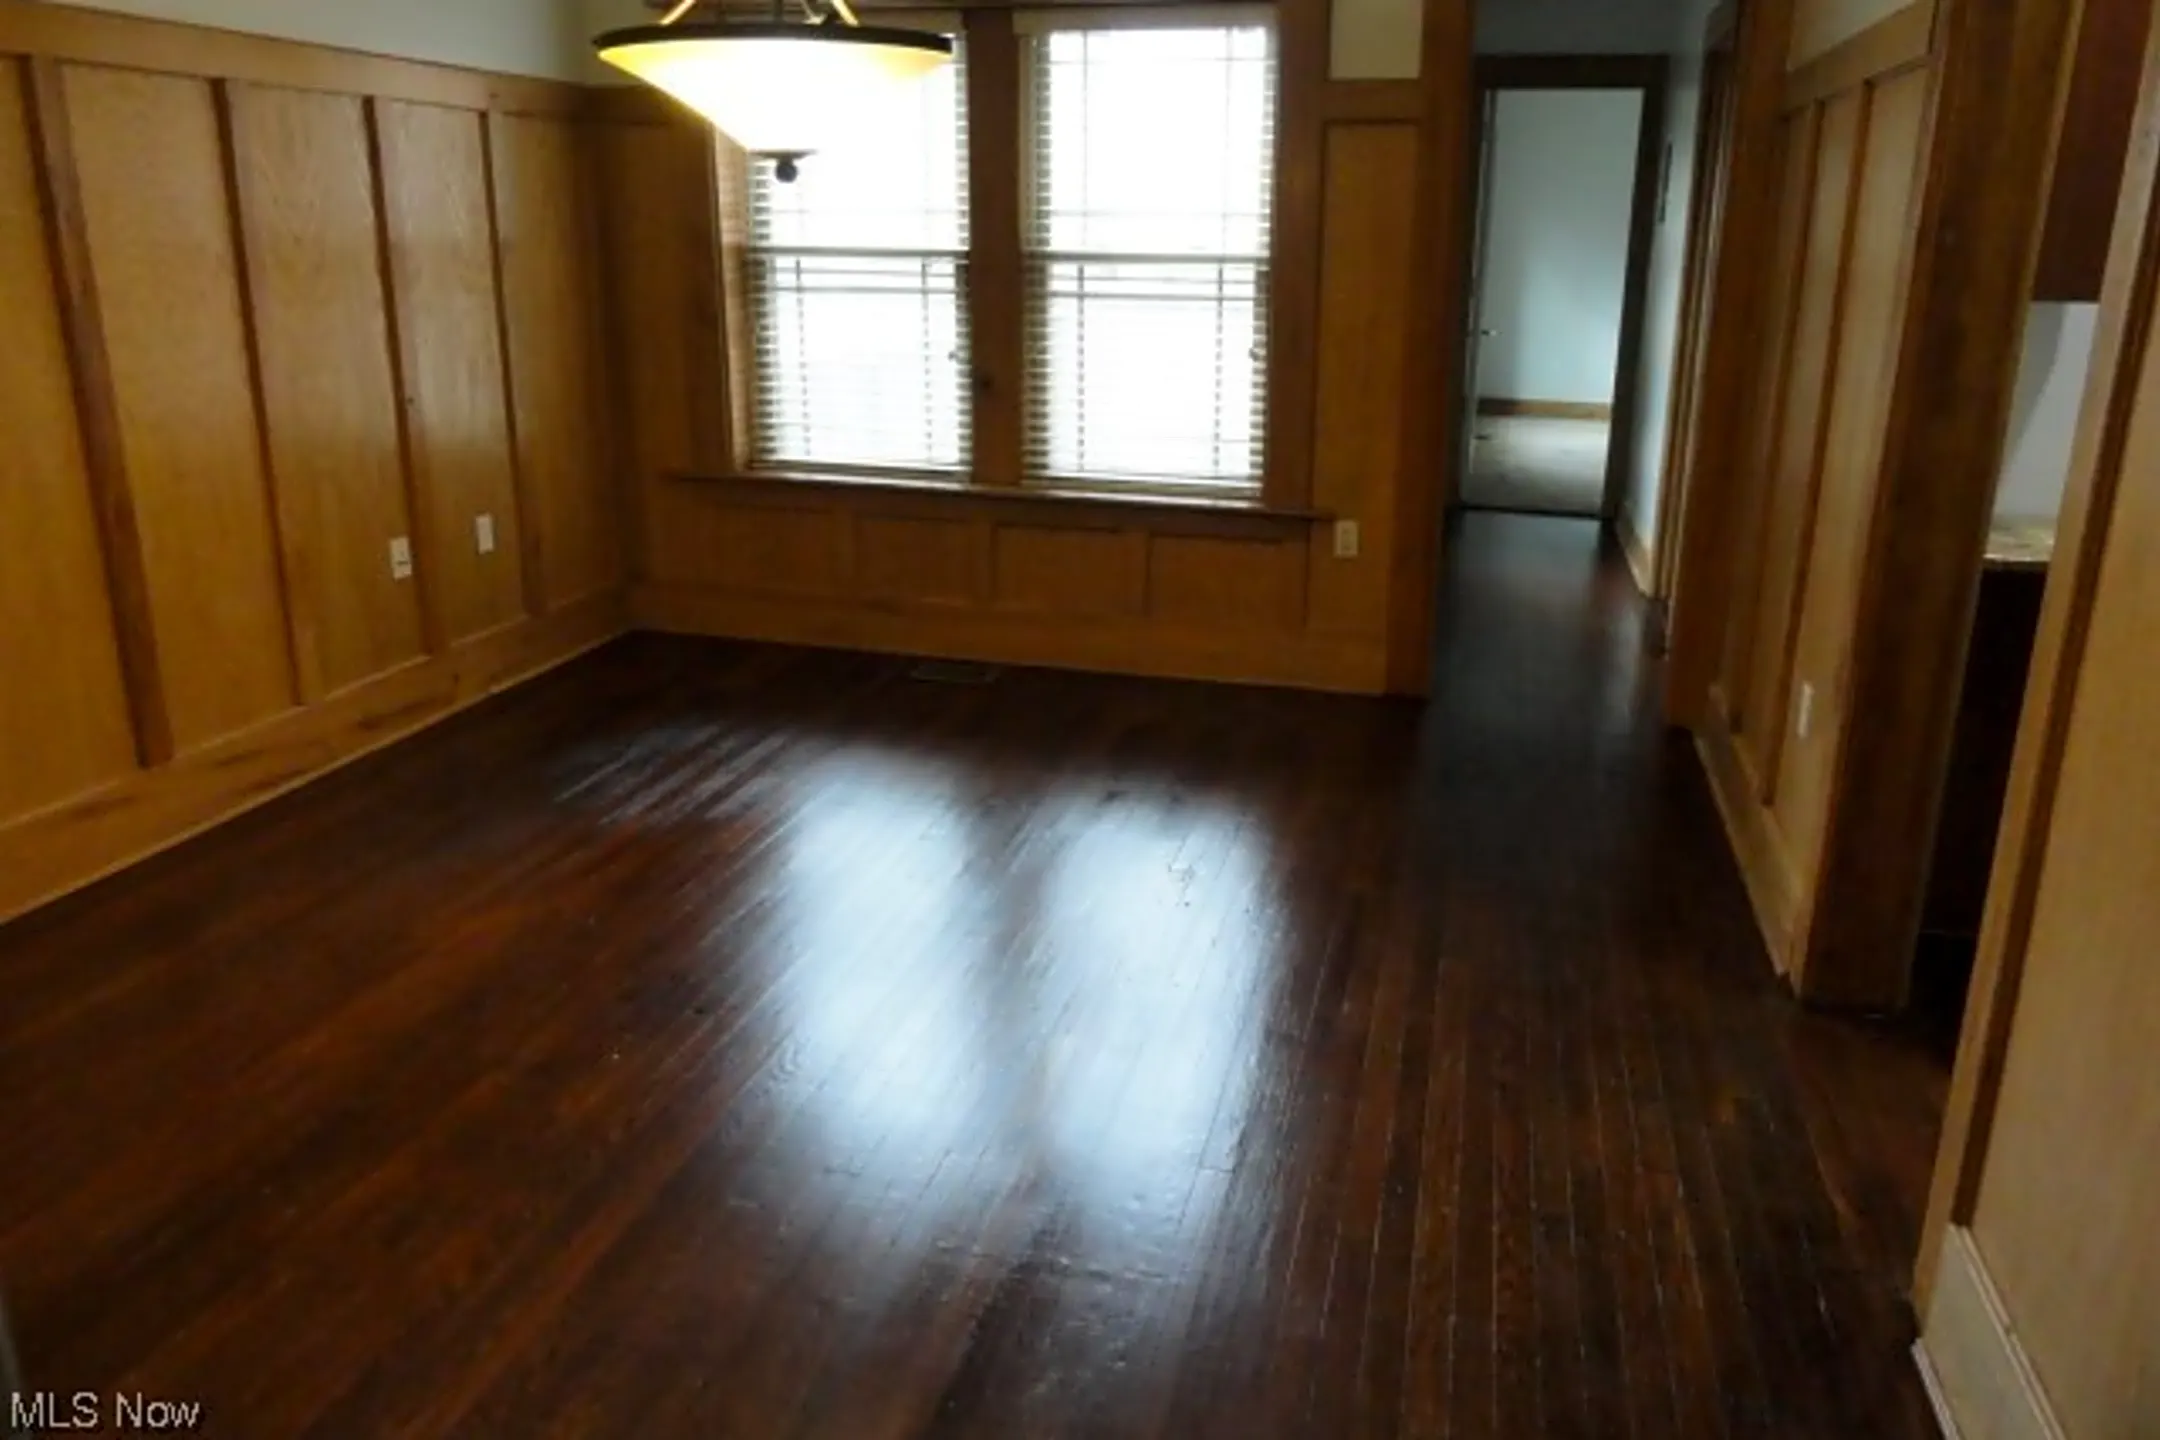 Dining Room - 11433 Ashbury Ave #2 - Cleveland, OH